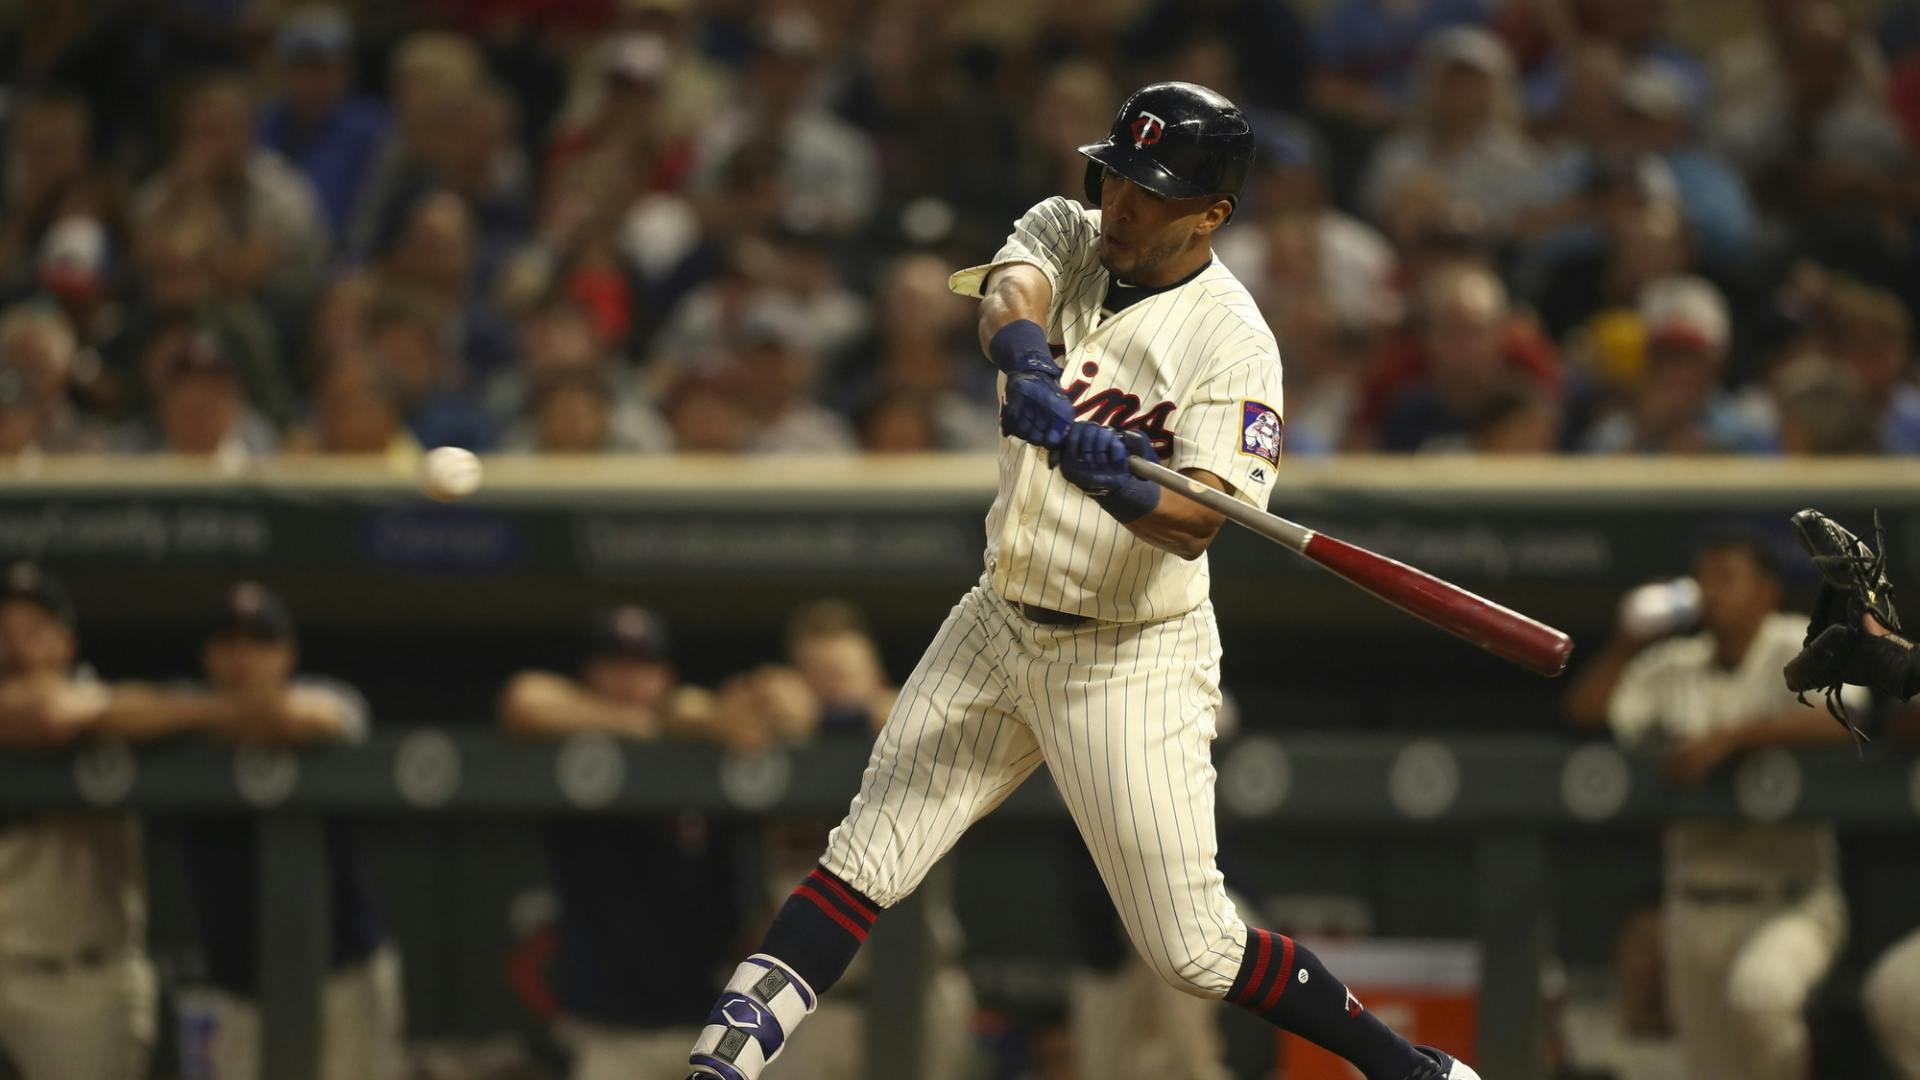 It helped the Twins beat the White Sox 11-1 on Wednesday